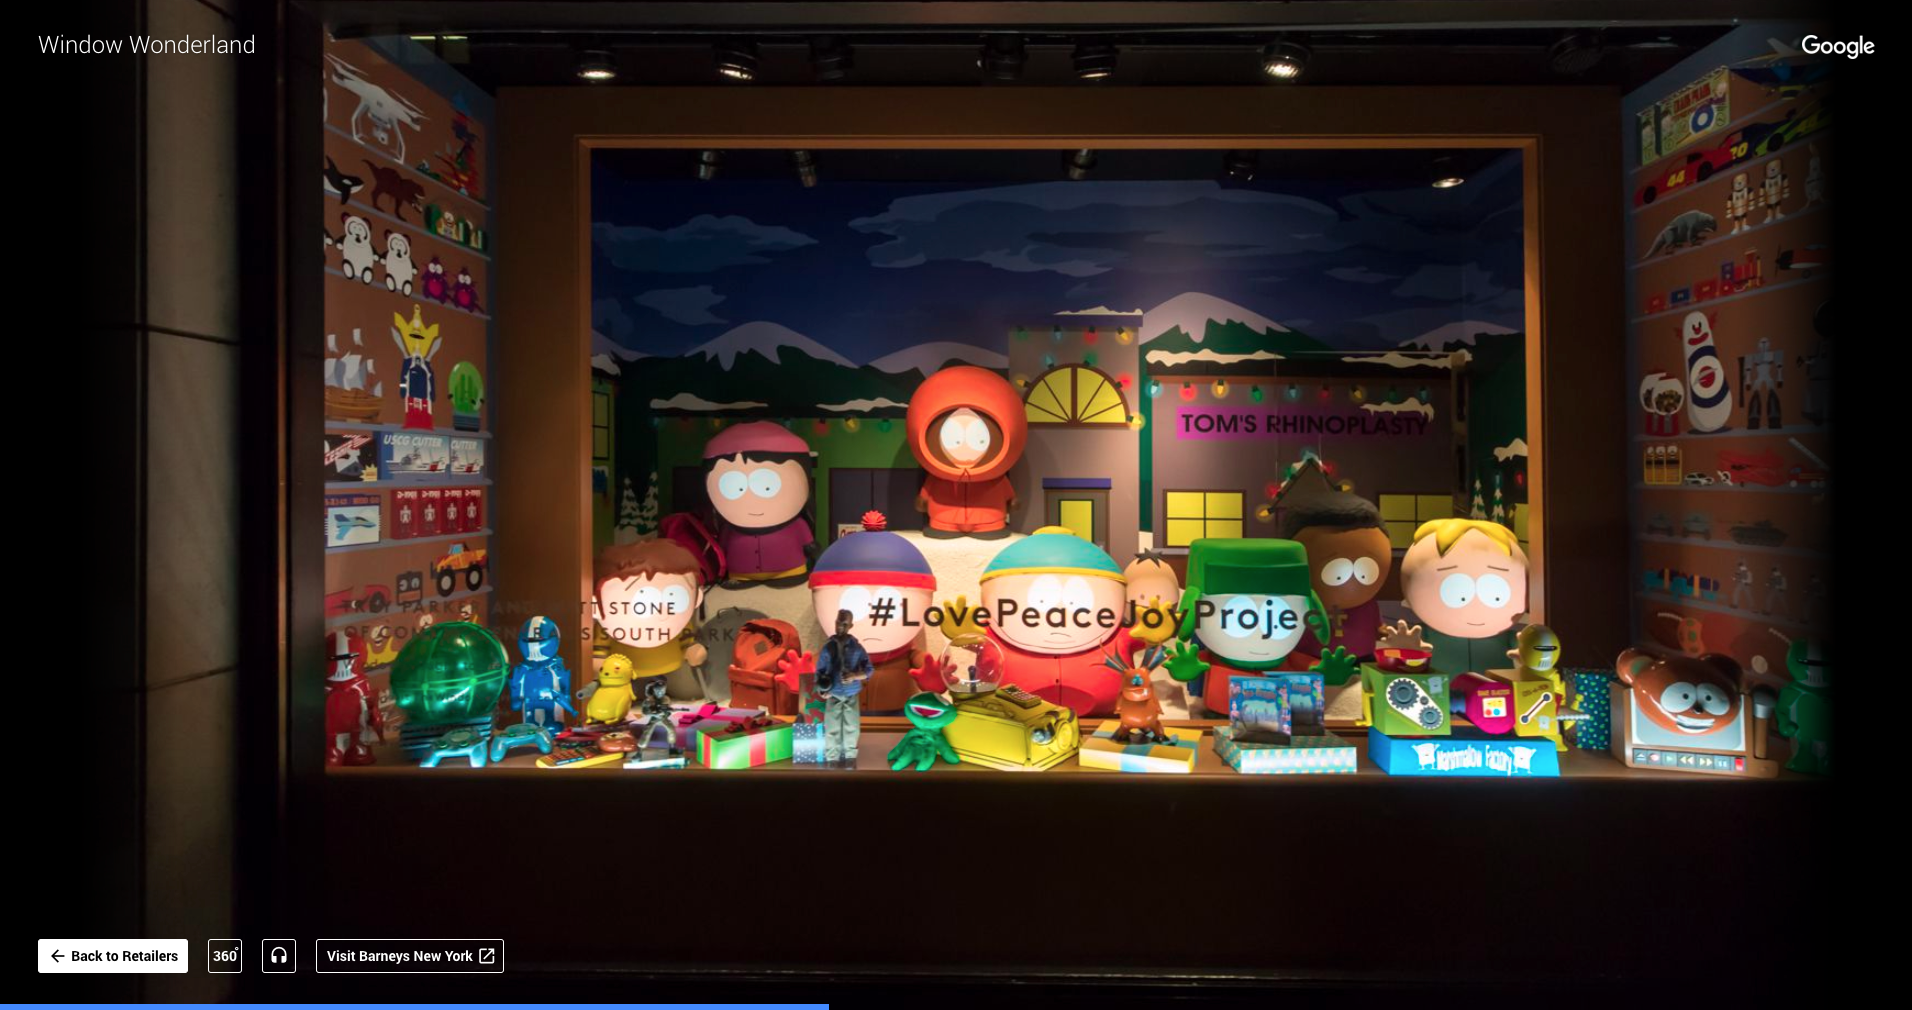 Take a virtual tour of New York City's iconic holiday windows